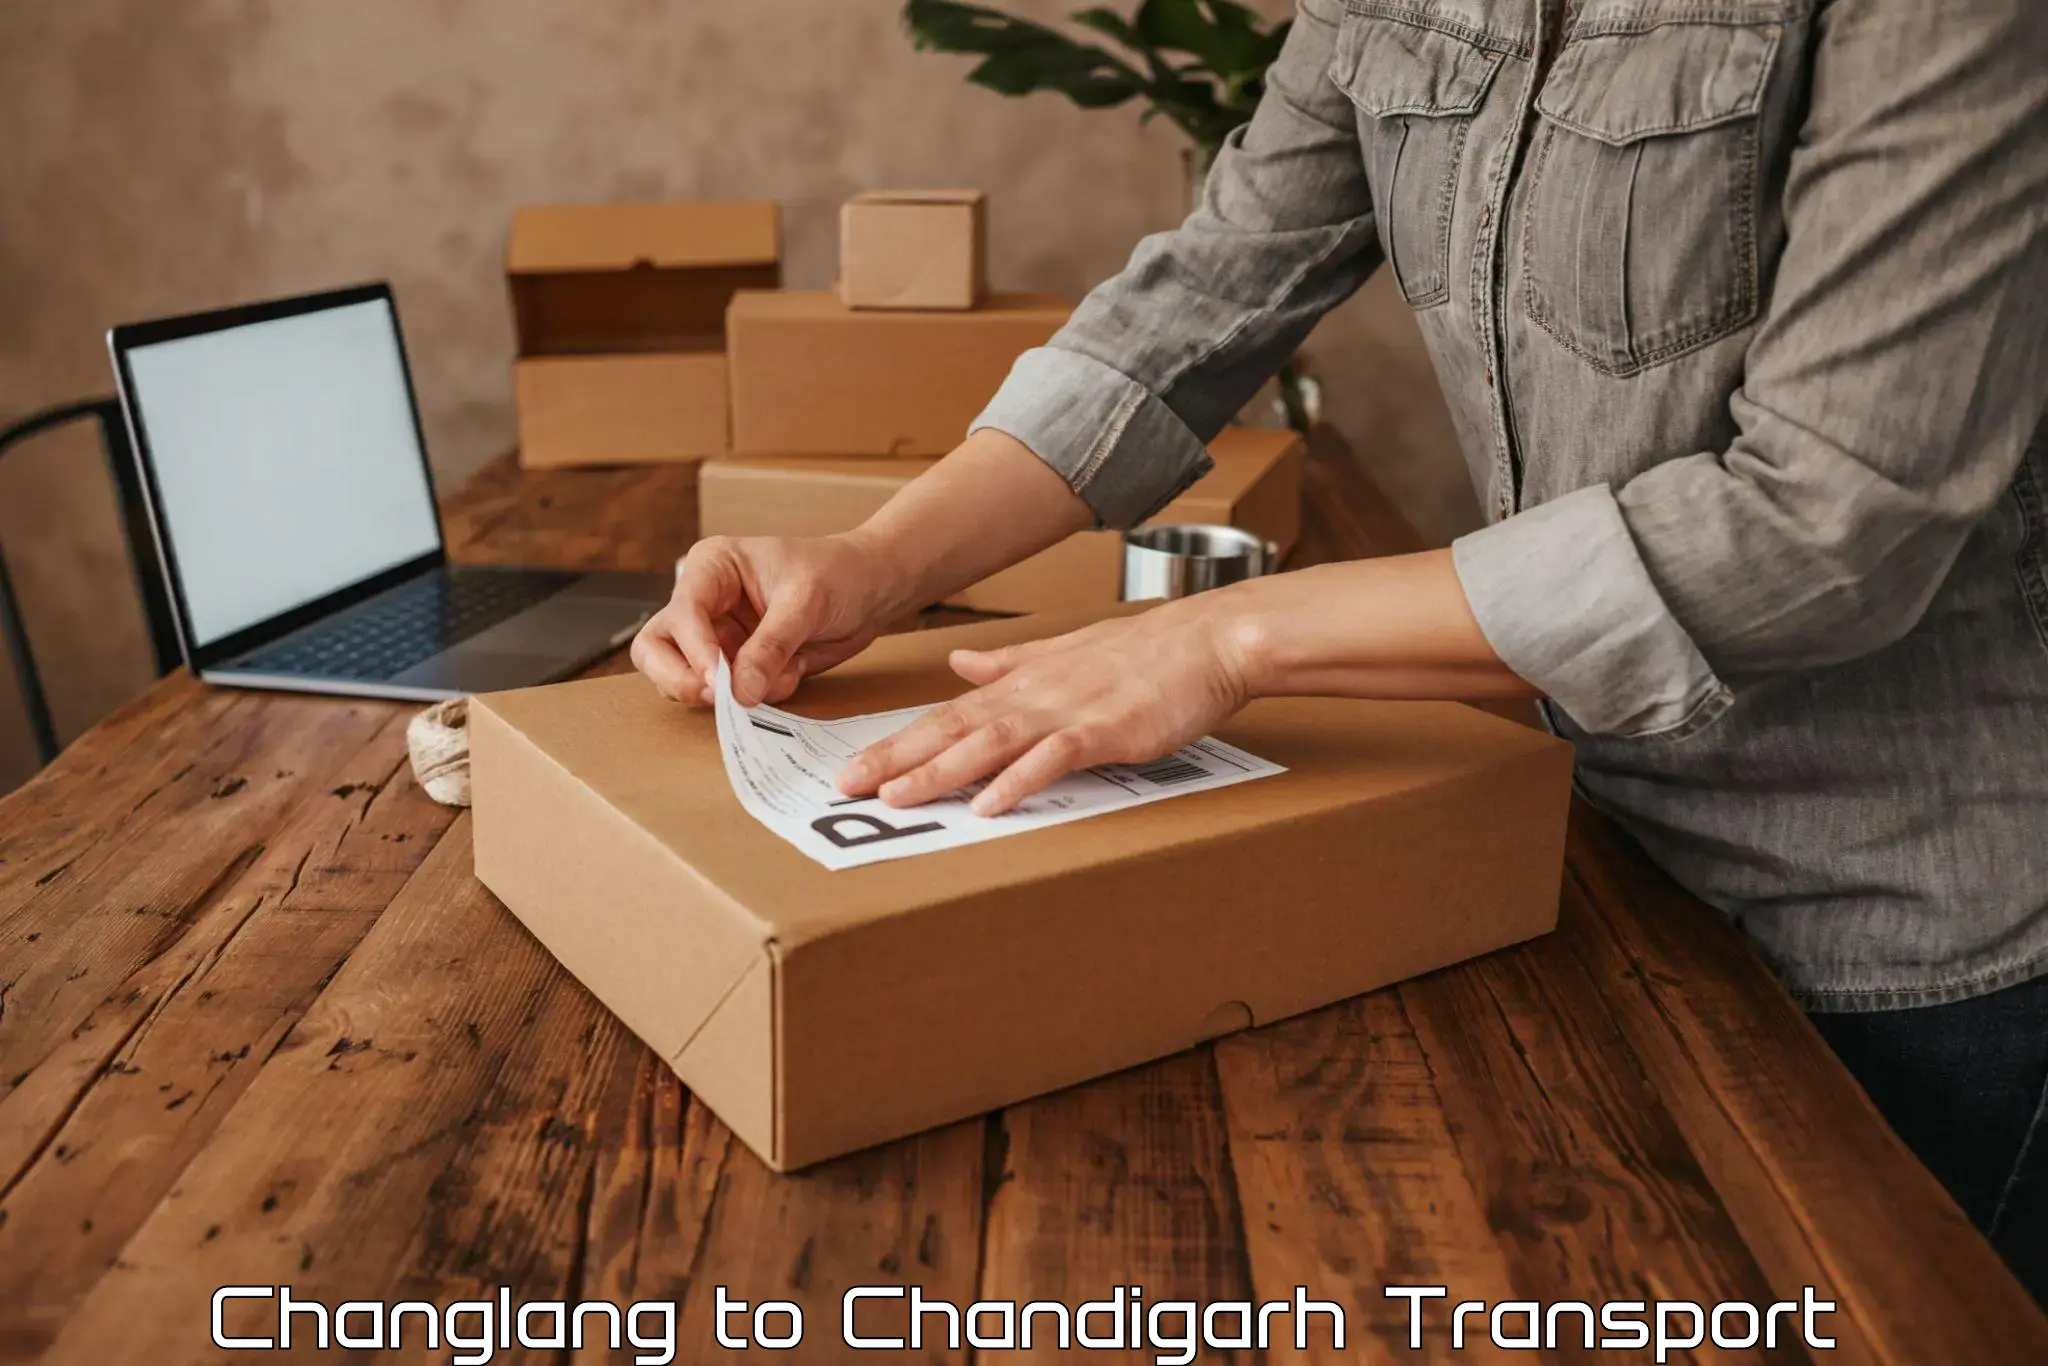 Cycle transportation service Changlang to Chandigarh